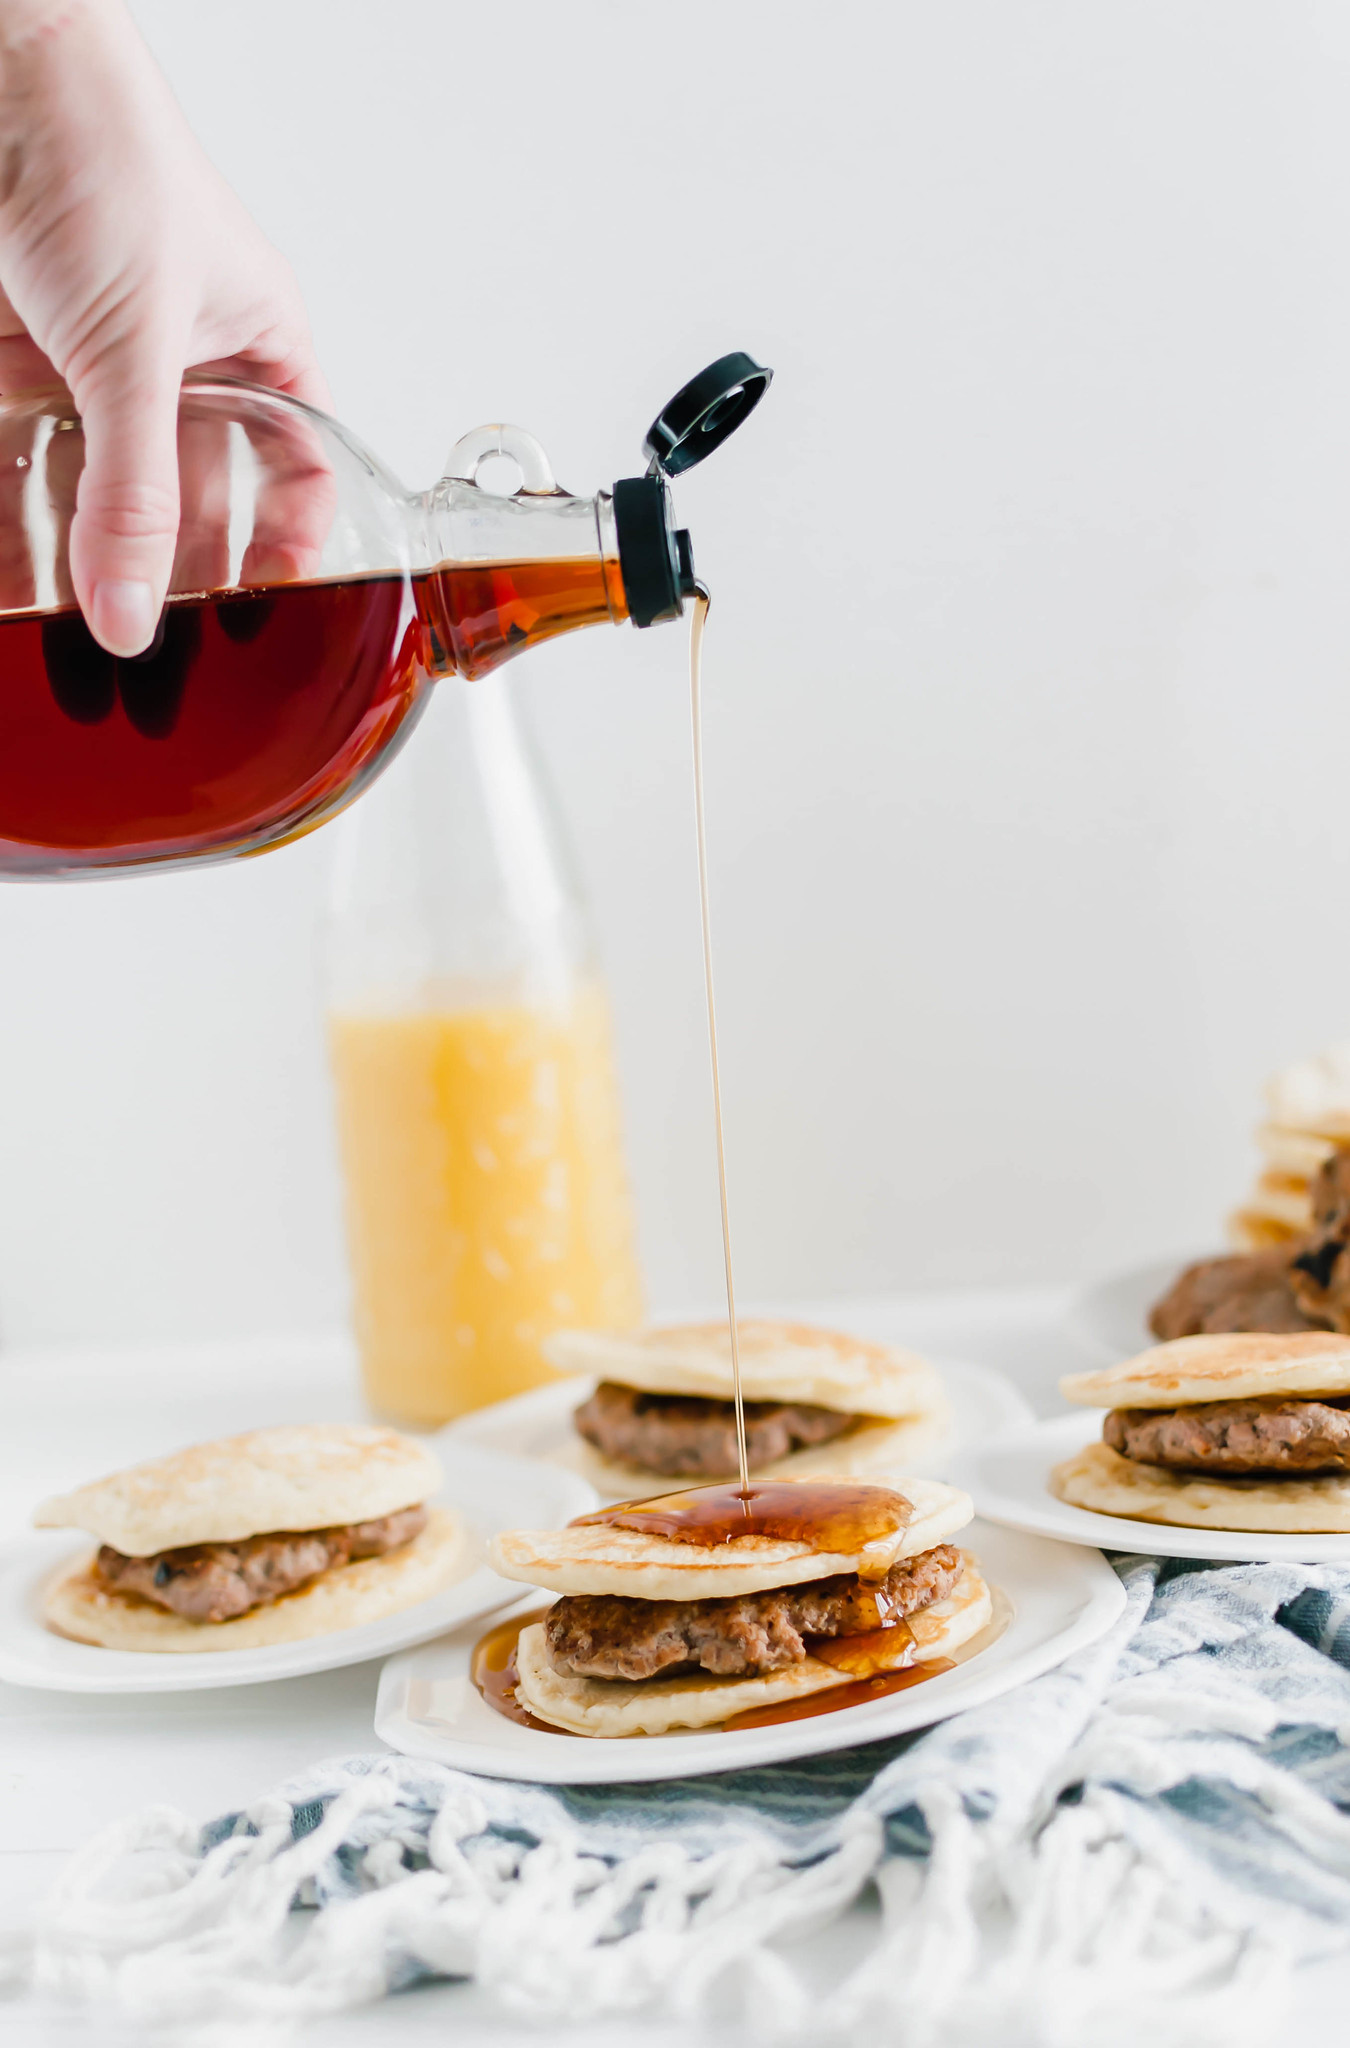 Turkey isn't just for dinner. This Turkey Sausage Breakfast Sandwich is super filling and will keep you energized all day. Juicy homemade turkey sausage patties sandwiched between two fluffy buttermilk pancakes. Maple syrup drizzle optional.